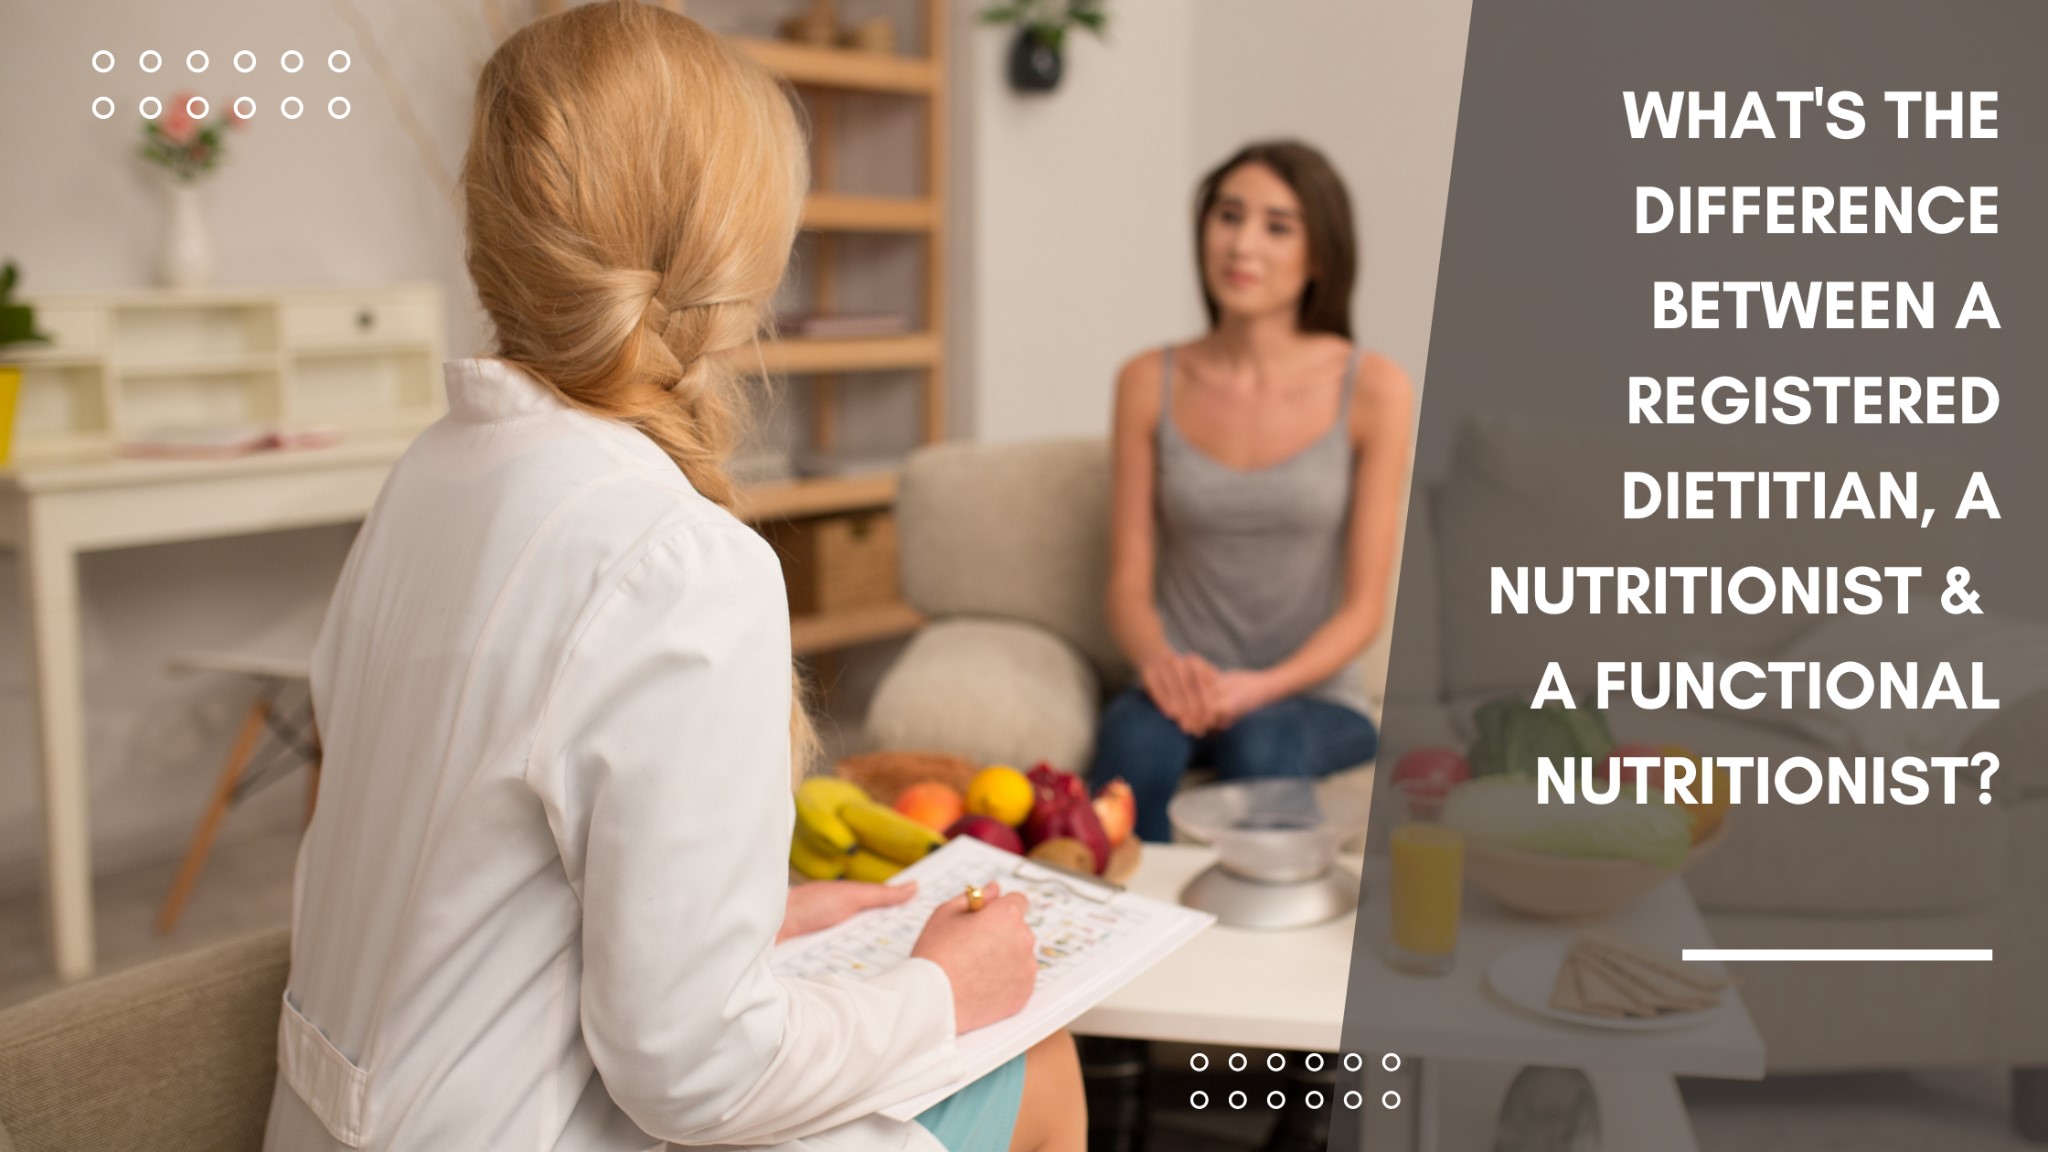 What is a functional Nutritionist?